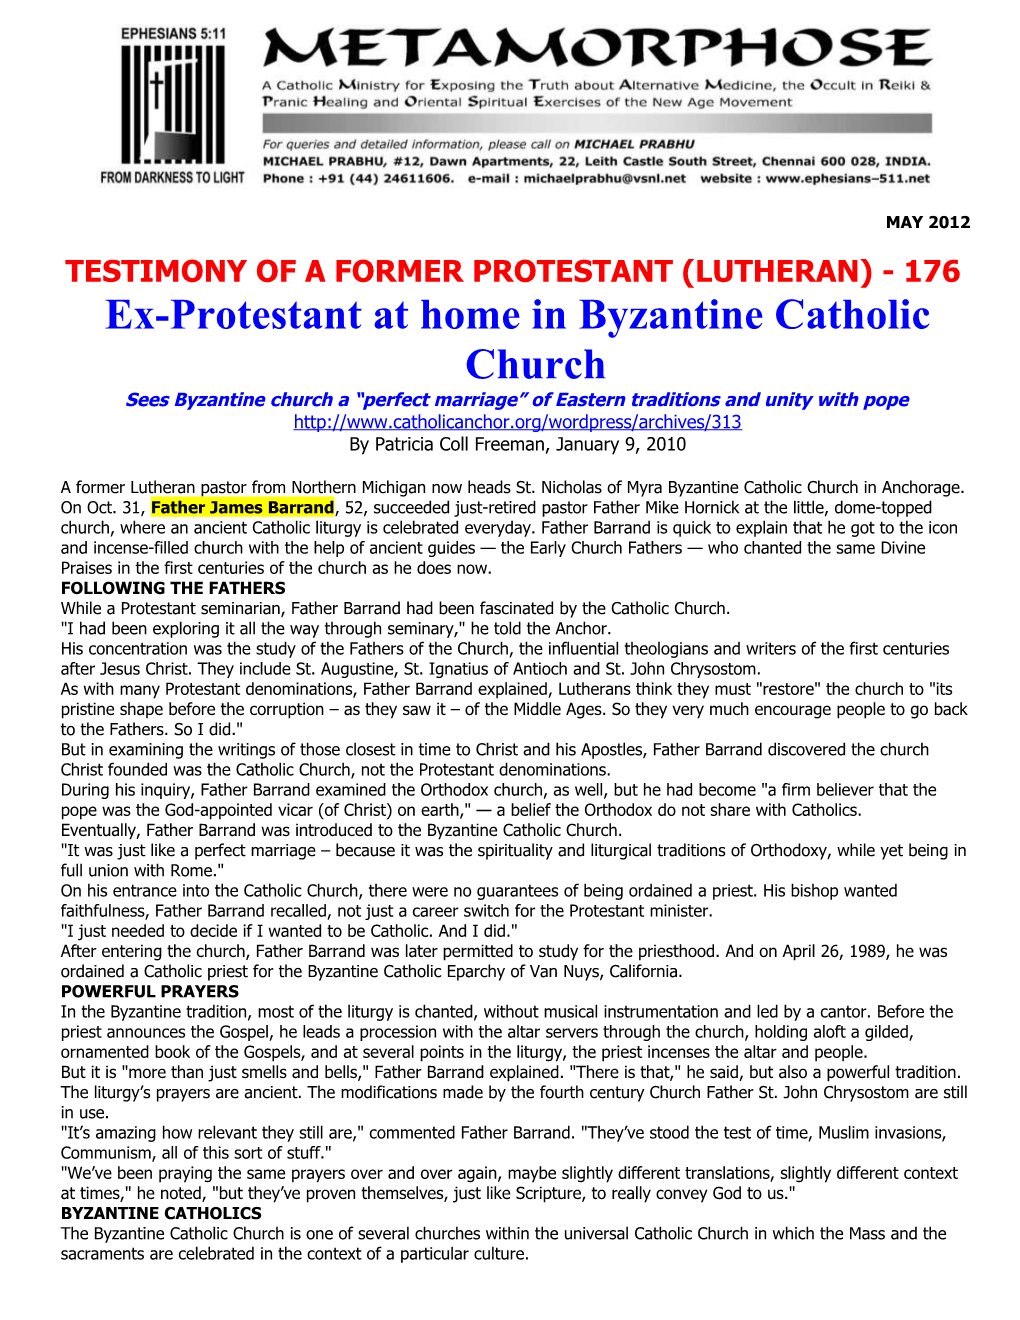 Testimony of a Former Protestant (Lutheran) - 176